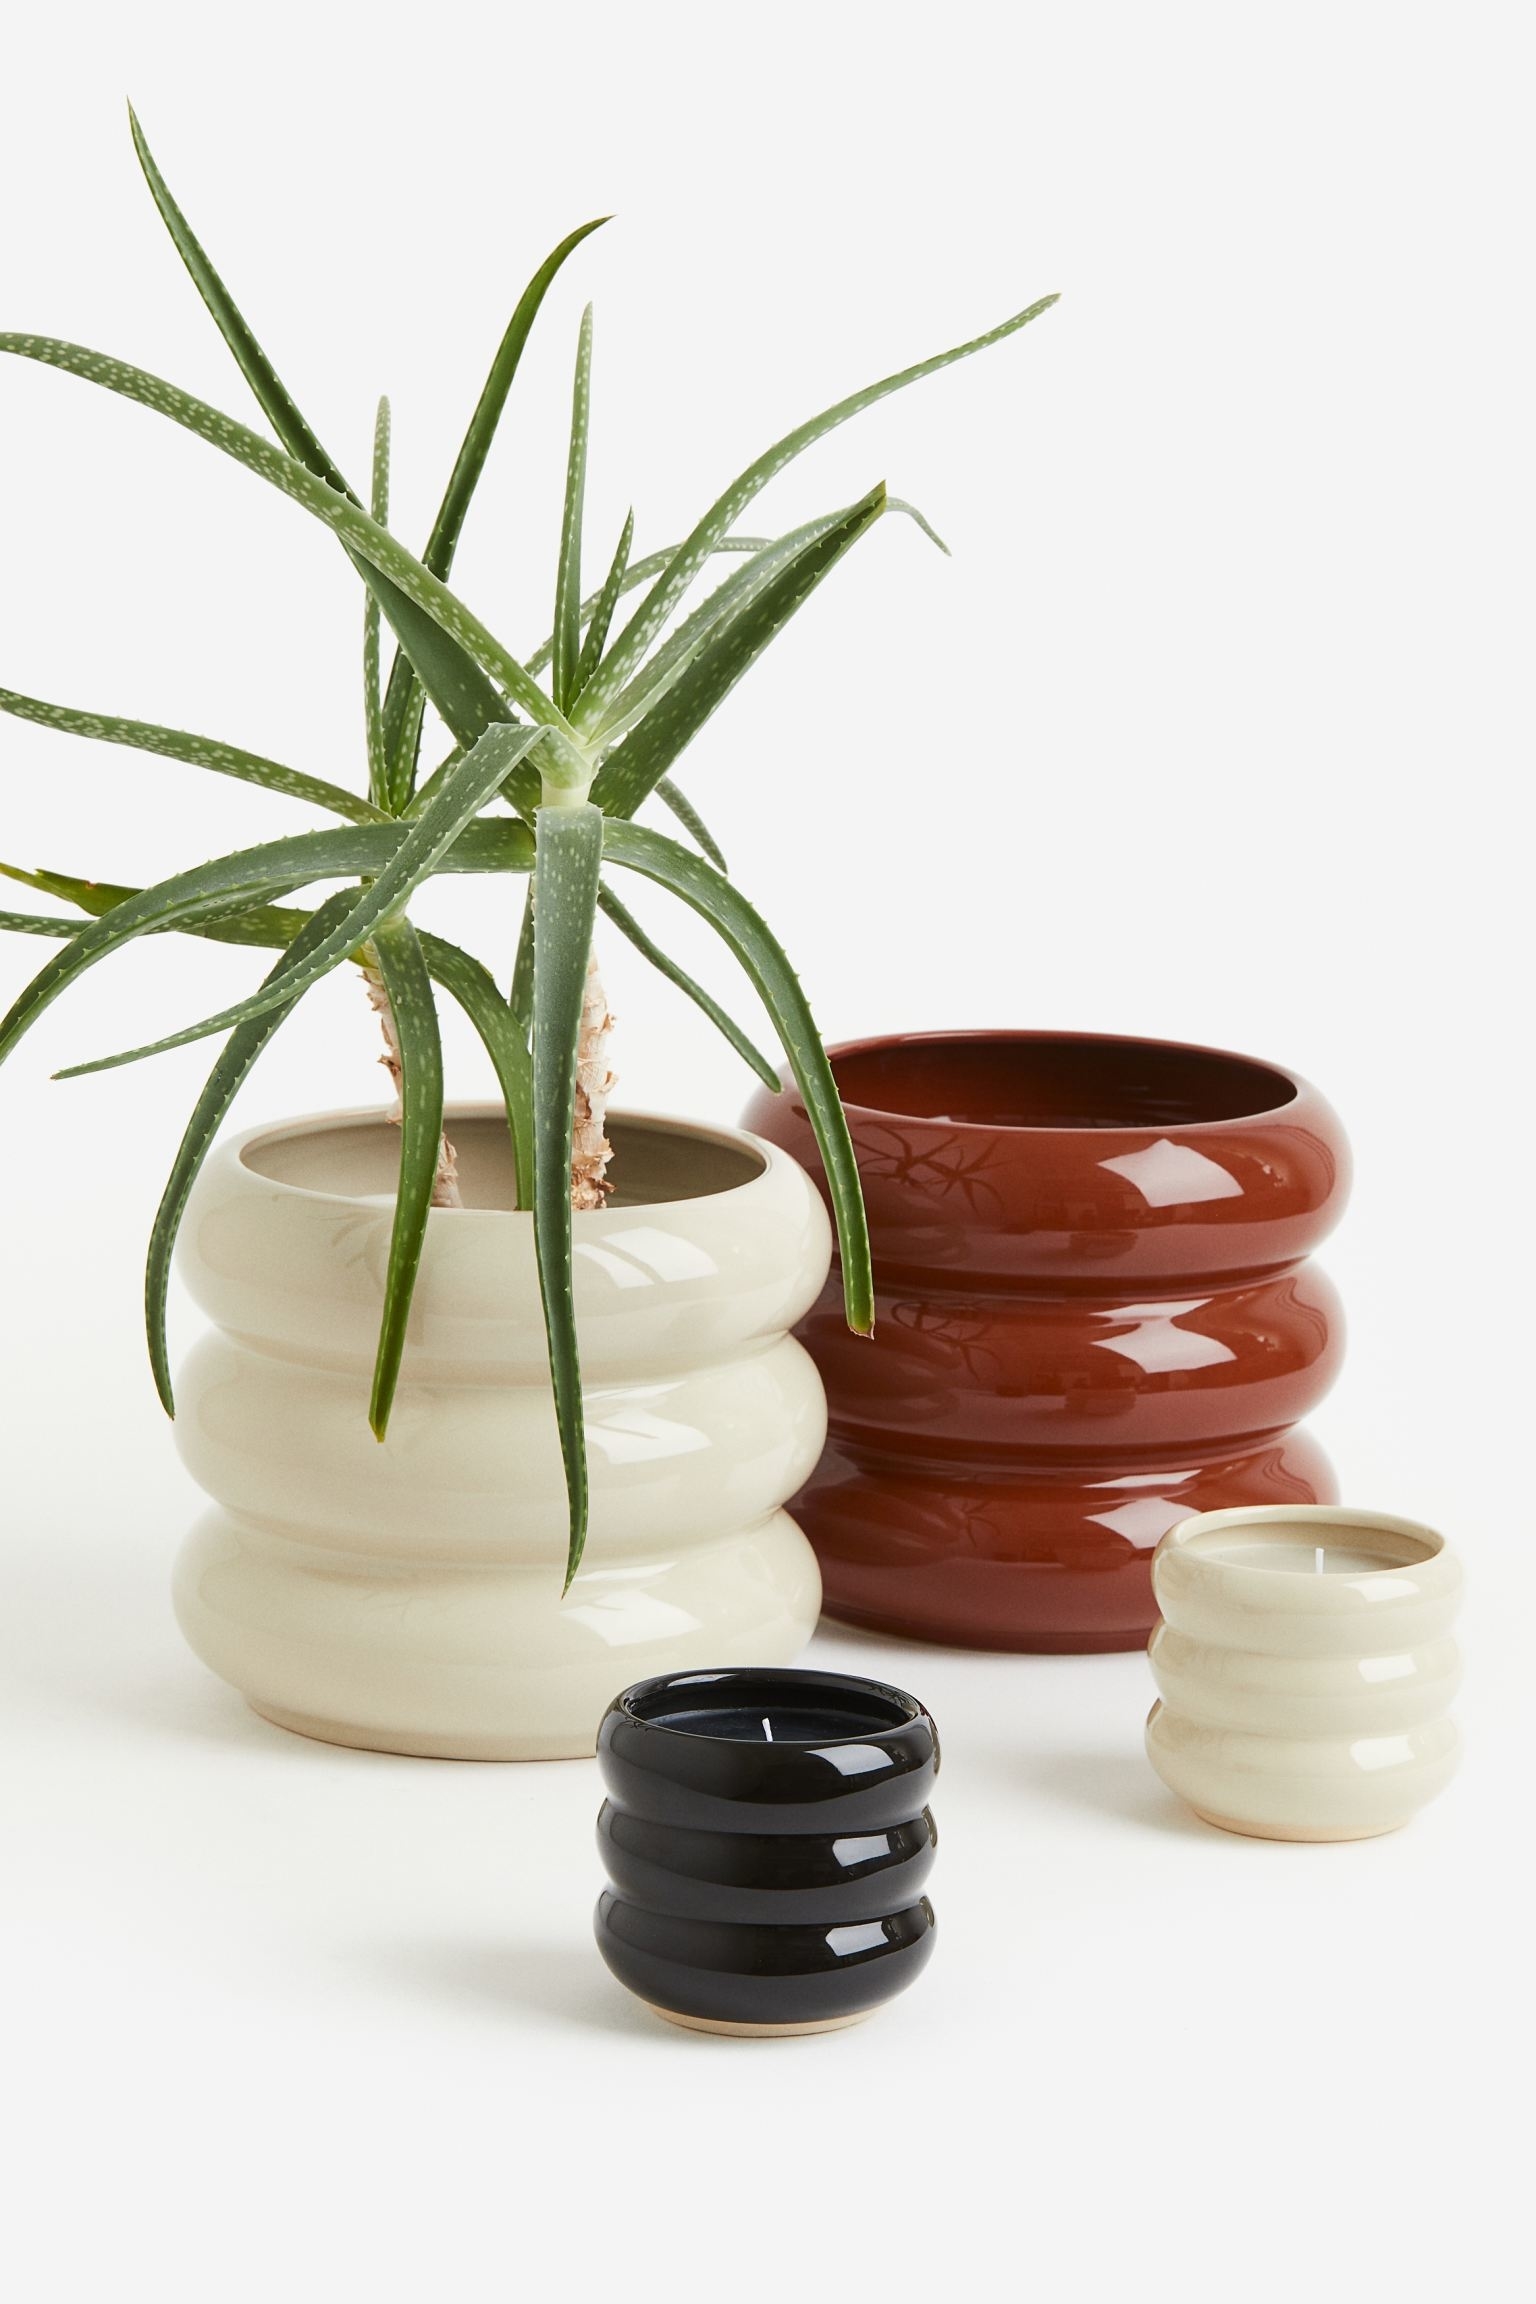 stoneware planters in beige, black, and red